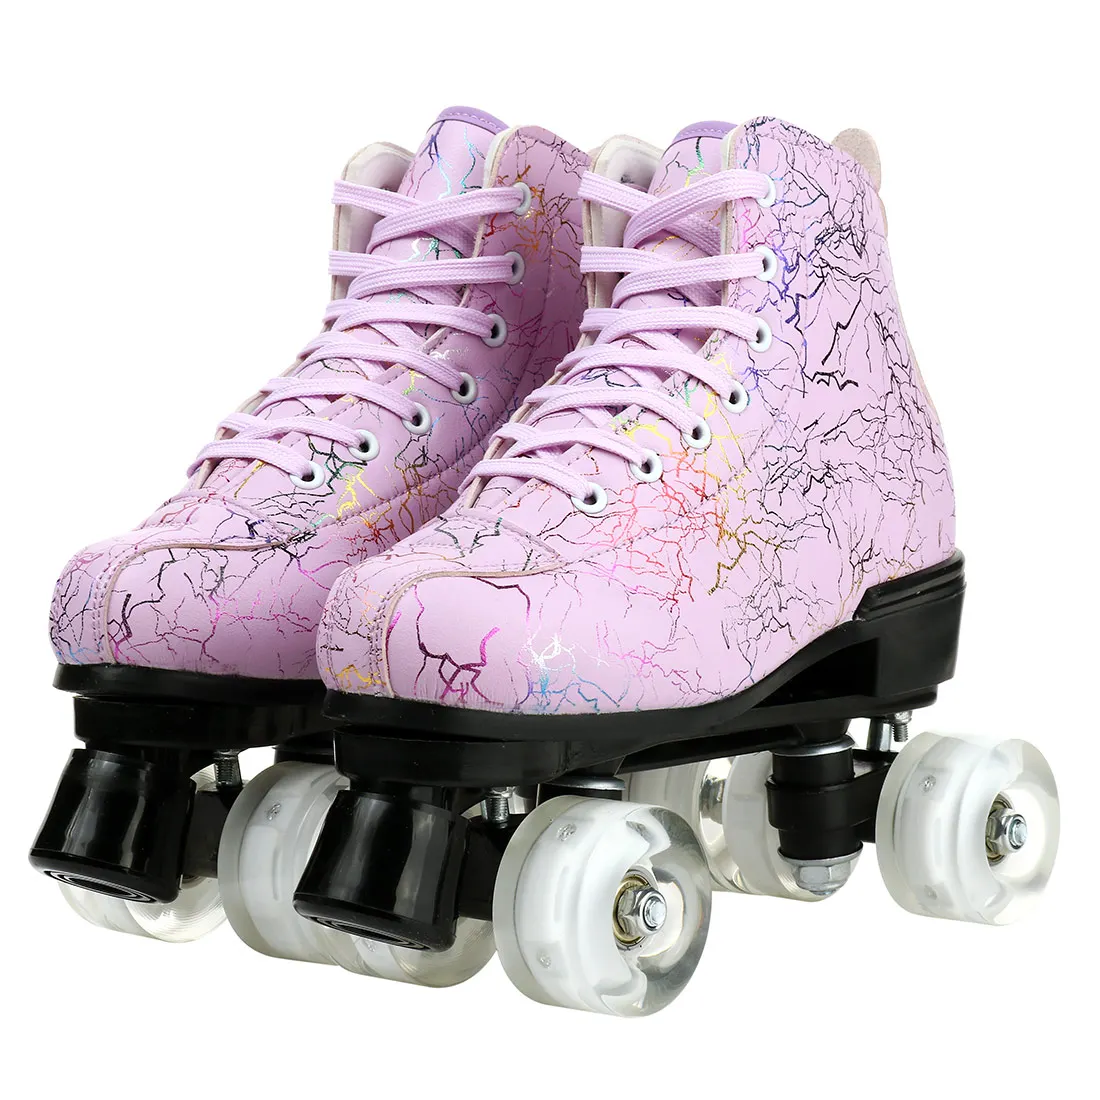 

Artificial Fibre Roller Skating Skate Shoes Sliding Inline Skates Rollers Sneakers Training Scrub Row 4 Wheel For Breathable